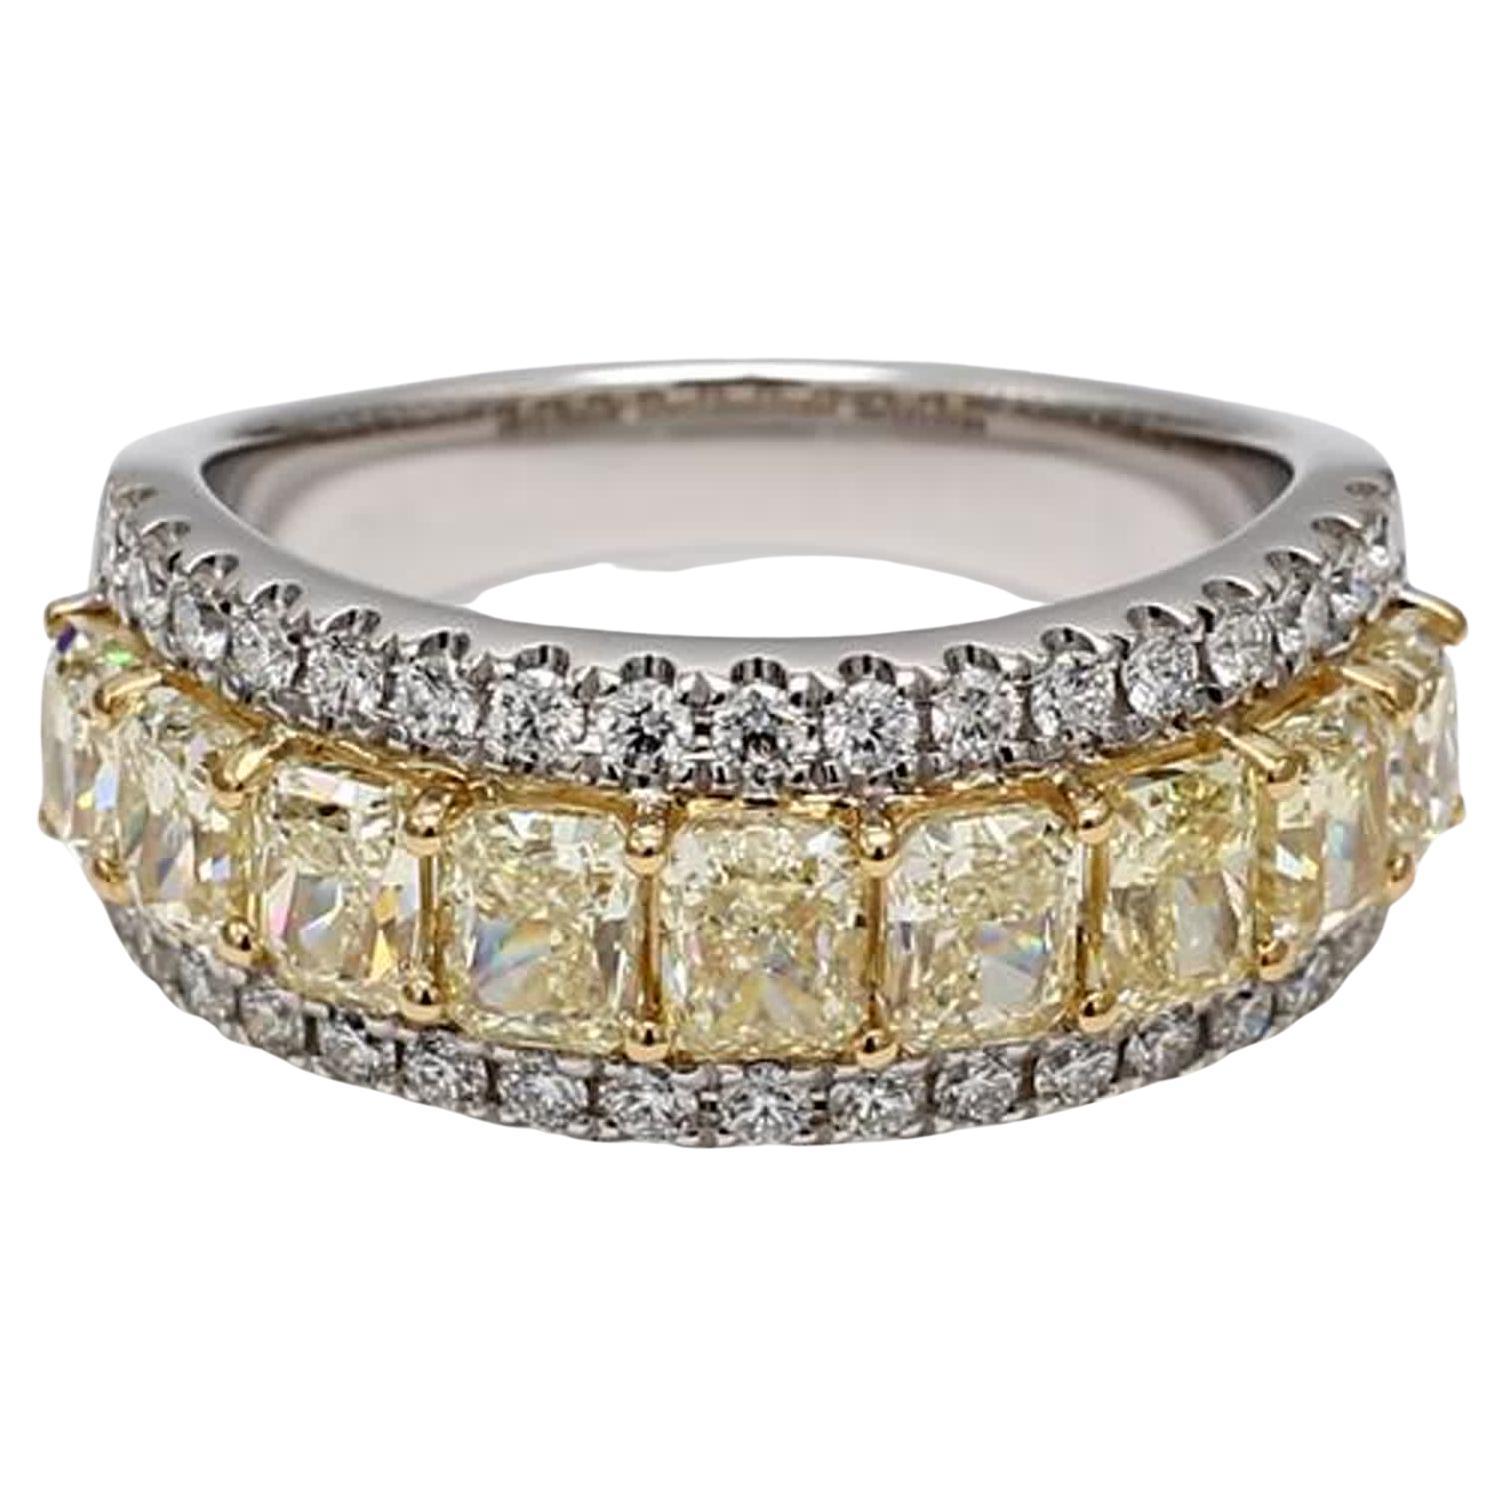 Natural Yellow Radiant and White Diamond 3.38 Carat TW Gold Wedding Band